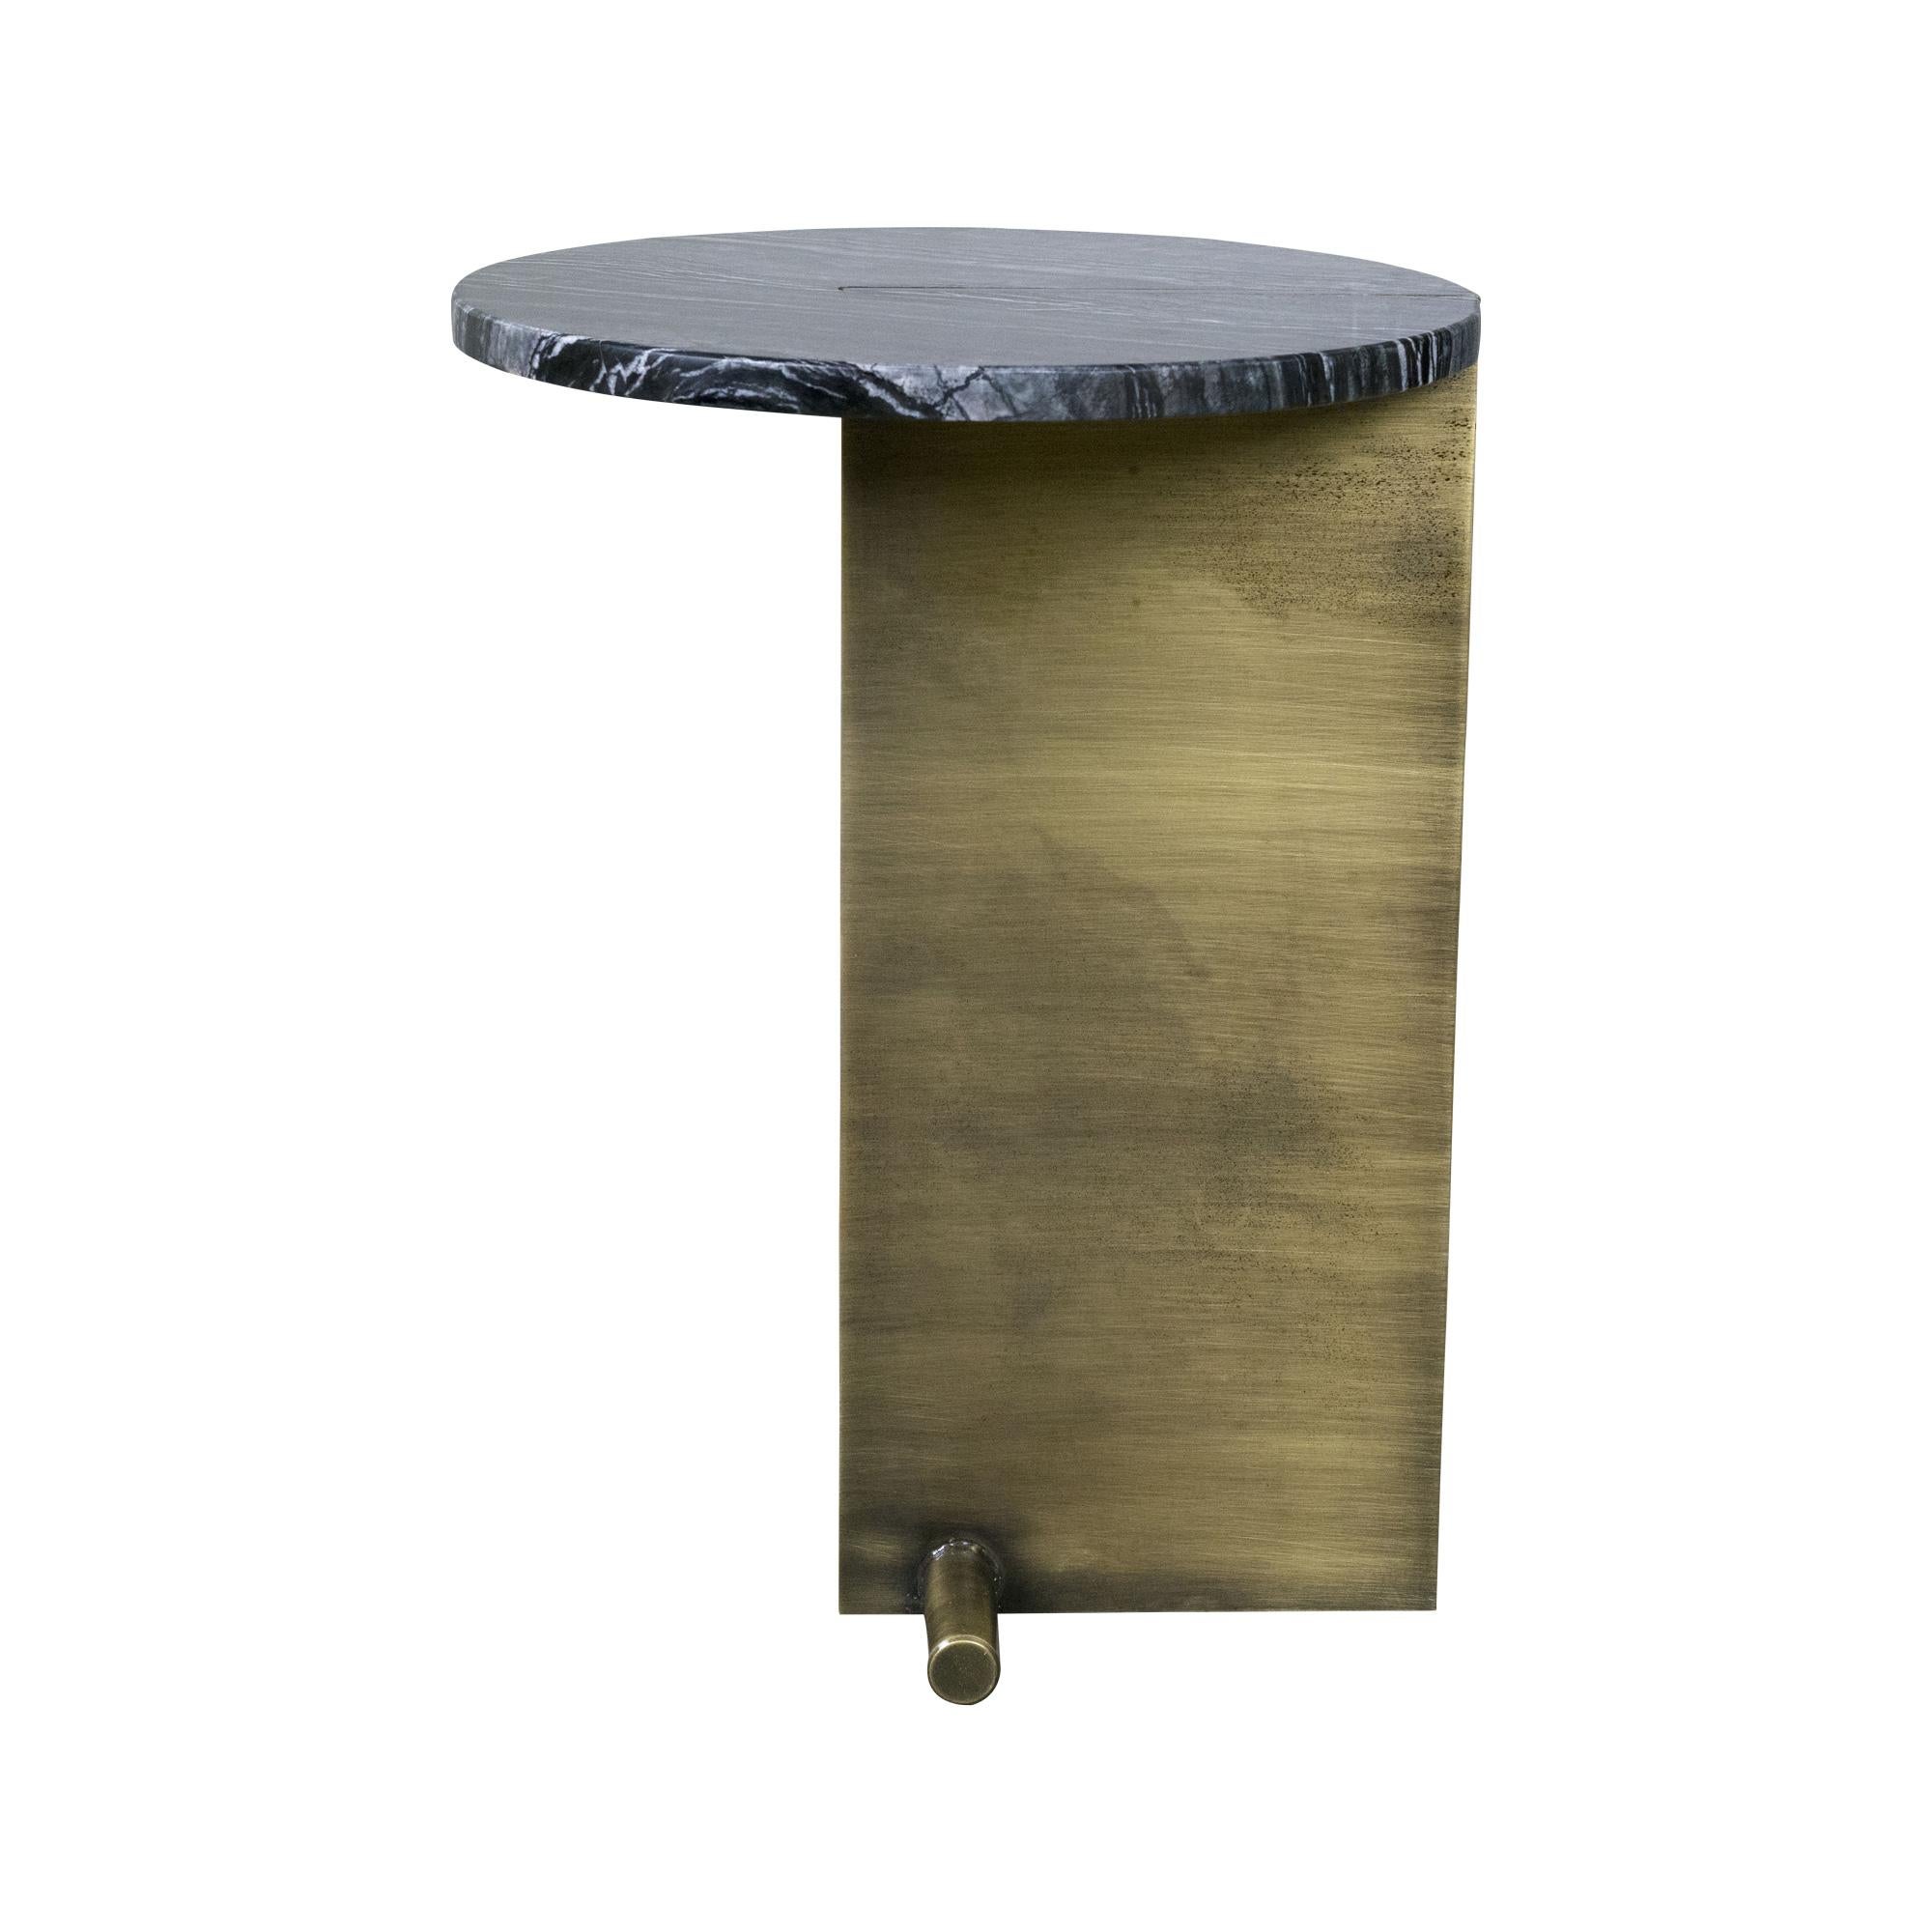 Side table with a round marble top mounted on a modern brass leg. 
Marble: black, green or white
Can be customized.